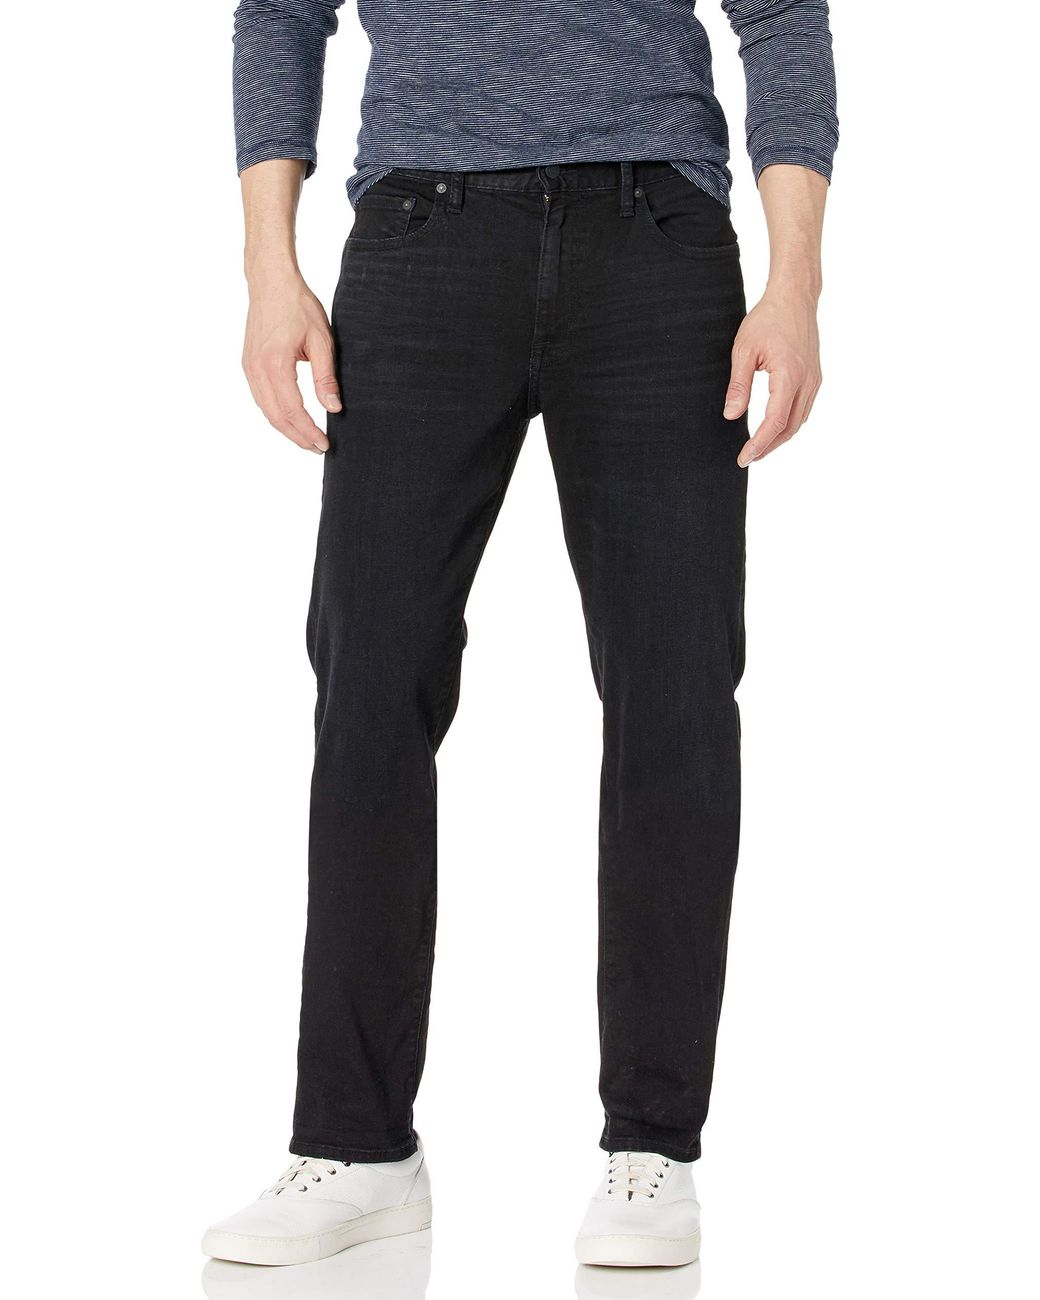 Lucky Brand Cotton 410 Athletic Fit Jean in Black for Men - Save 61% - Lyst